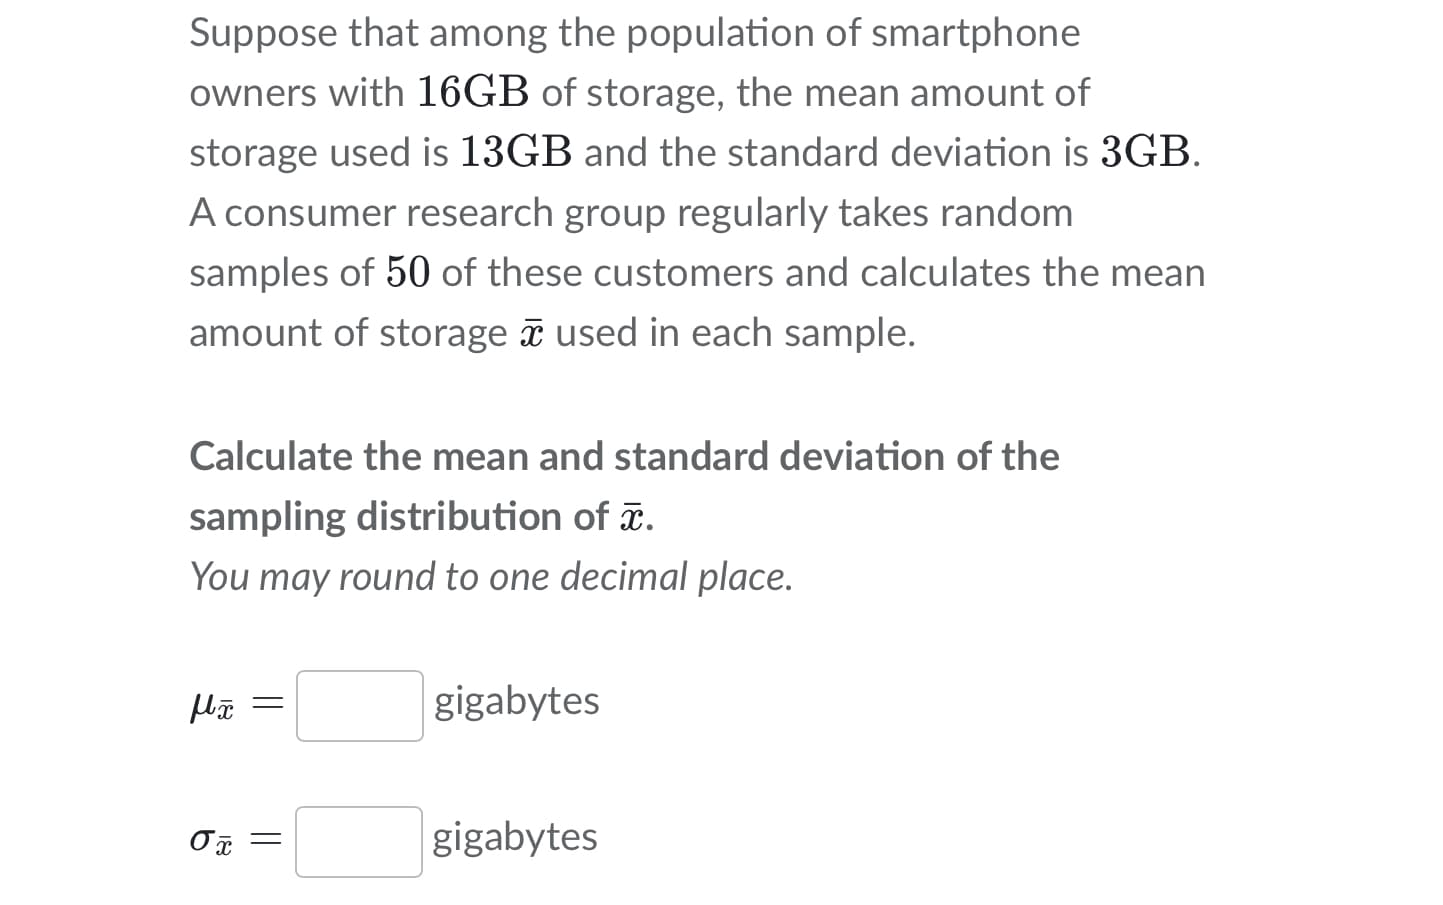 Suppose that among the population of smartphone
owners with 16GB of storage, the mean amount of
storage used is 13GB and the standard deviation is 3GB.
A consumer research group regularly takes random
samples of 50 of these customers and calculates the mean
amount of storage used in each sample.
Calculate the mean and standard deviation of the
sampling distribution of .
You may round to one decimal place.
gigabytes
gigabytes
